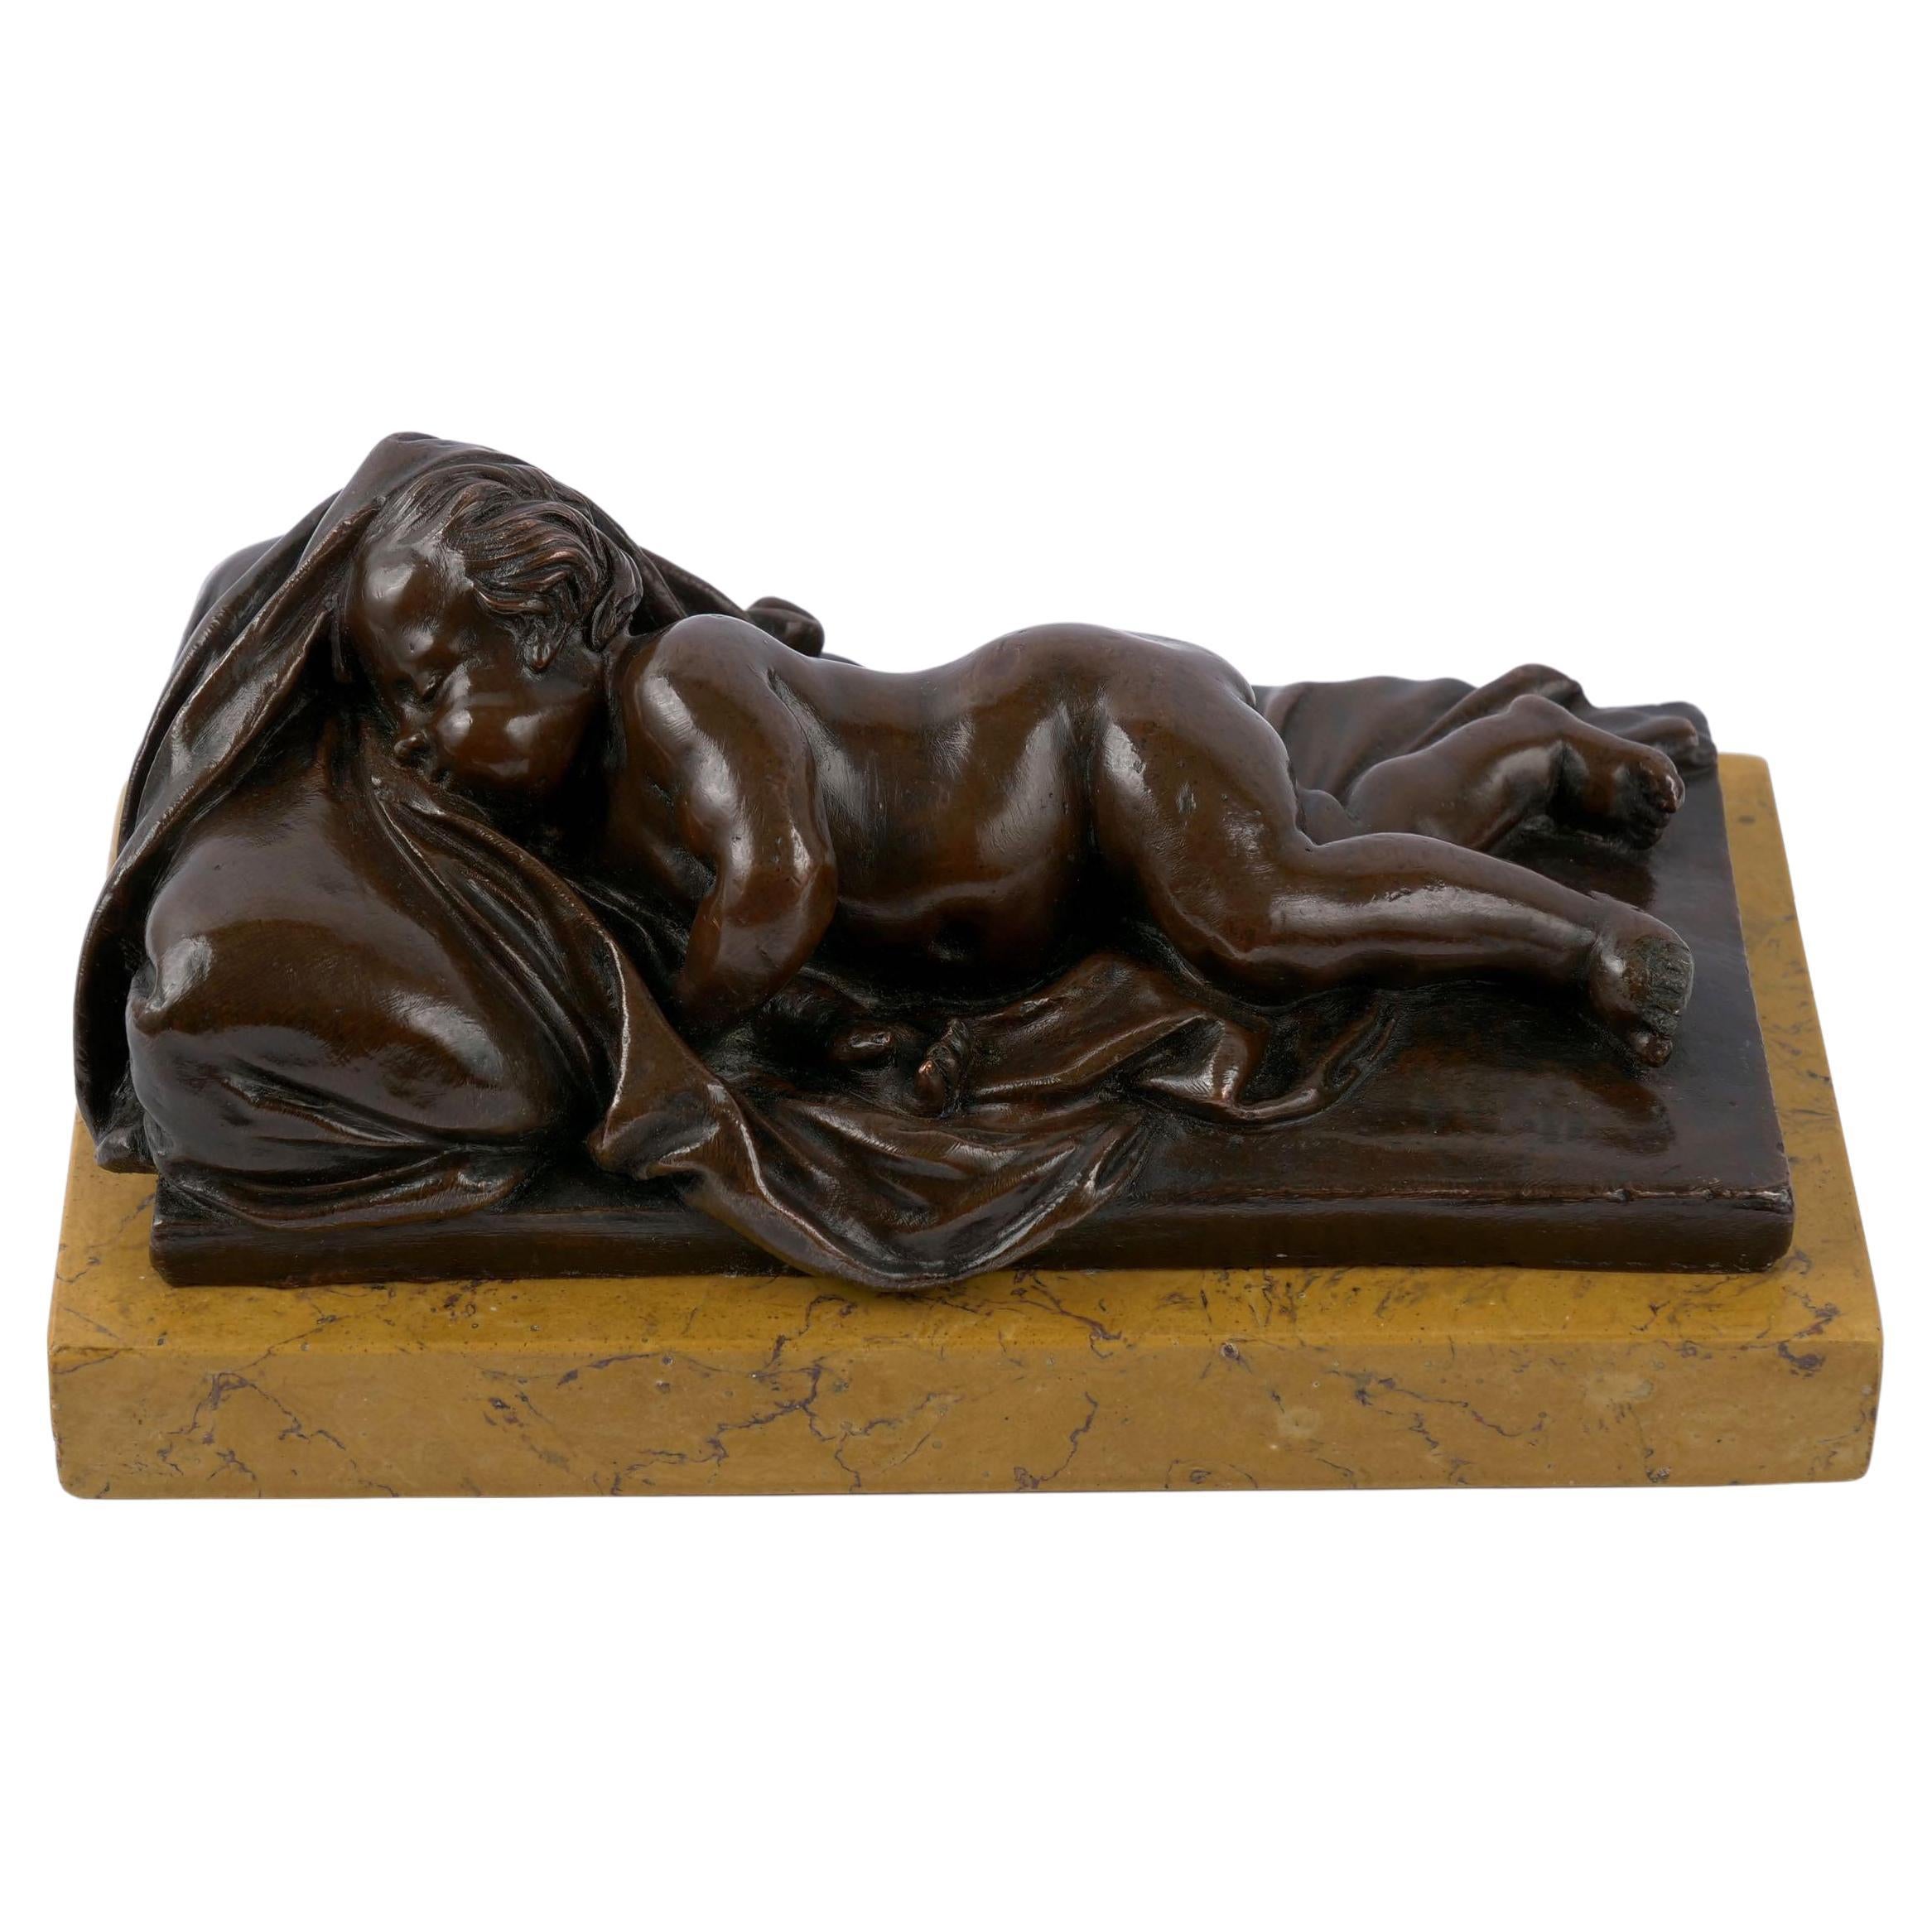 Antique Paperweight Sculpture of “Sleeping Putto” After François Duquesnoy